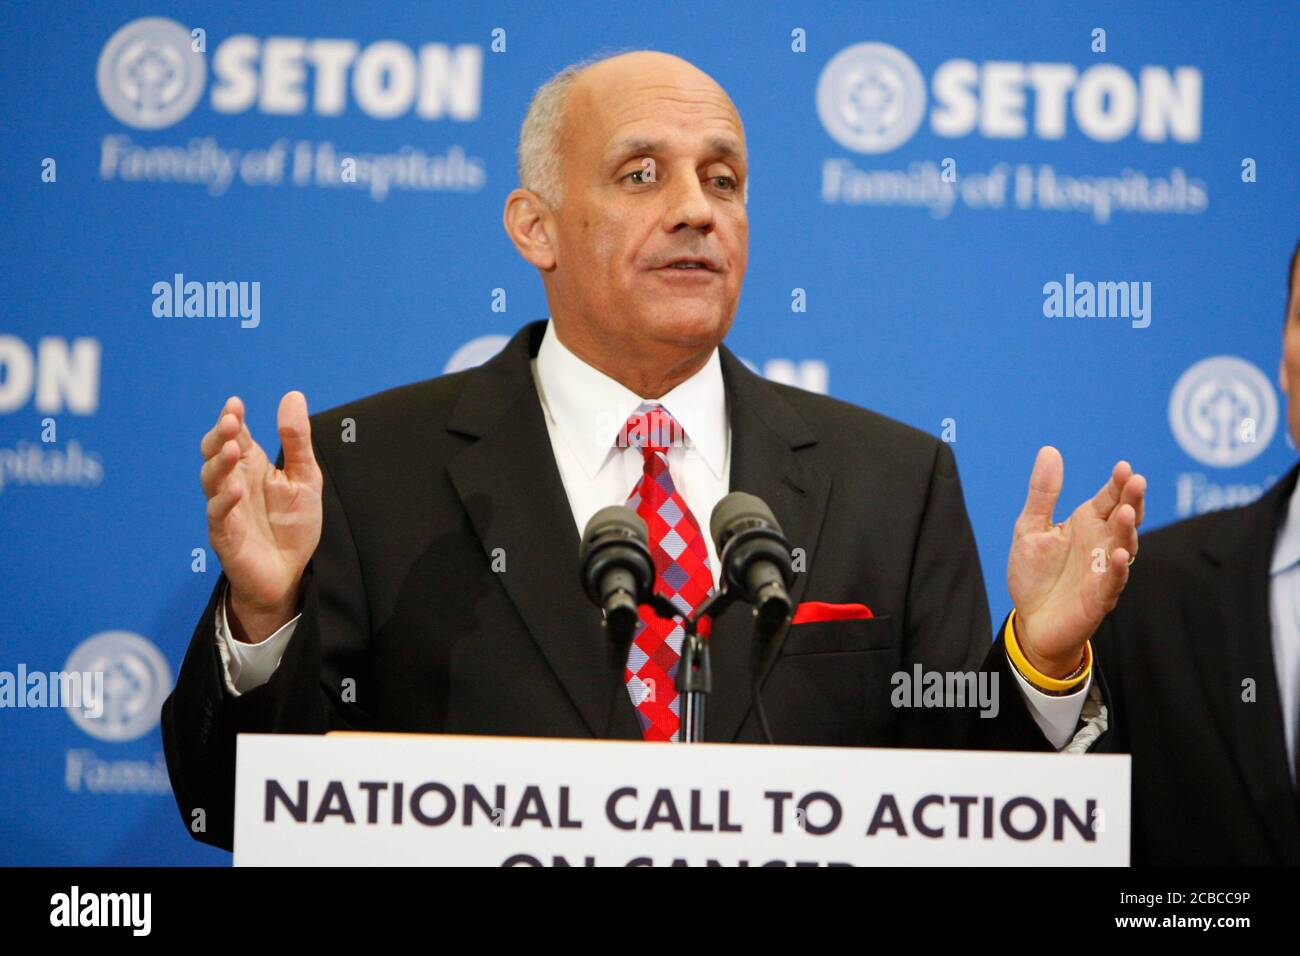 Austin, Texas USA, January 18, 2008:  Former Surgeon General Richard Carmona speaks to the press about a cancer health initiative after touring a cancer ward at Brackenridge Hospital. ©Bob Daemmrich Stock Photo